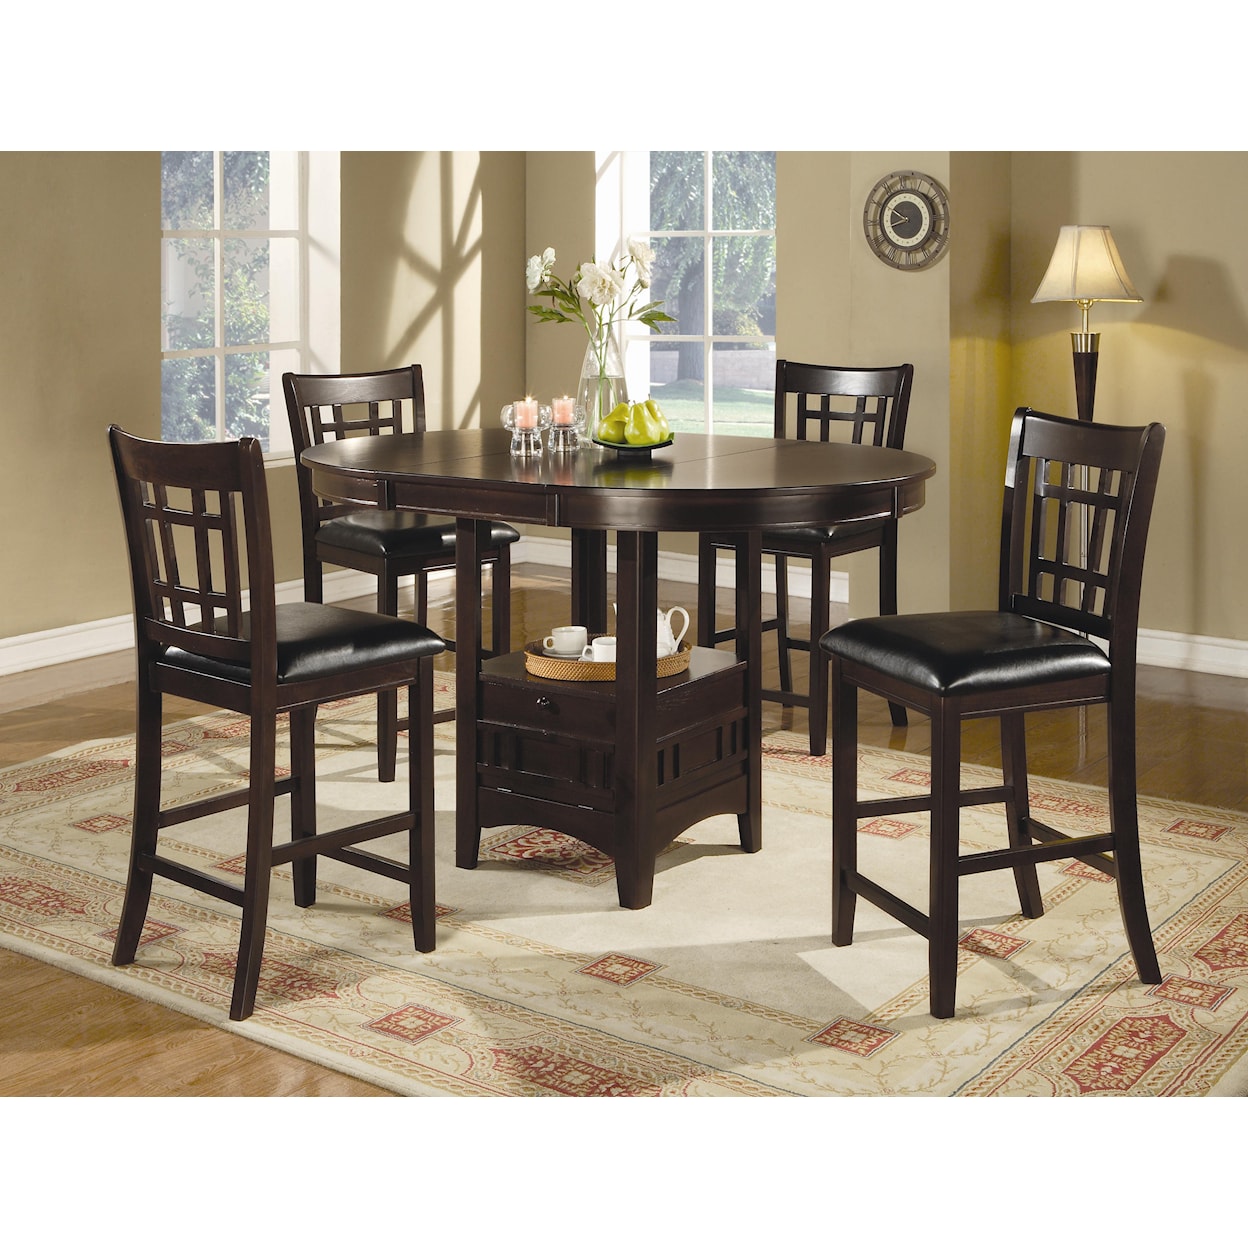 Coaster Lavon 7 Piece Counter Table and Chair Set